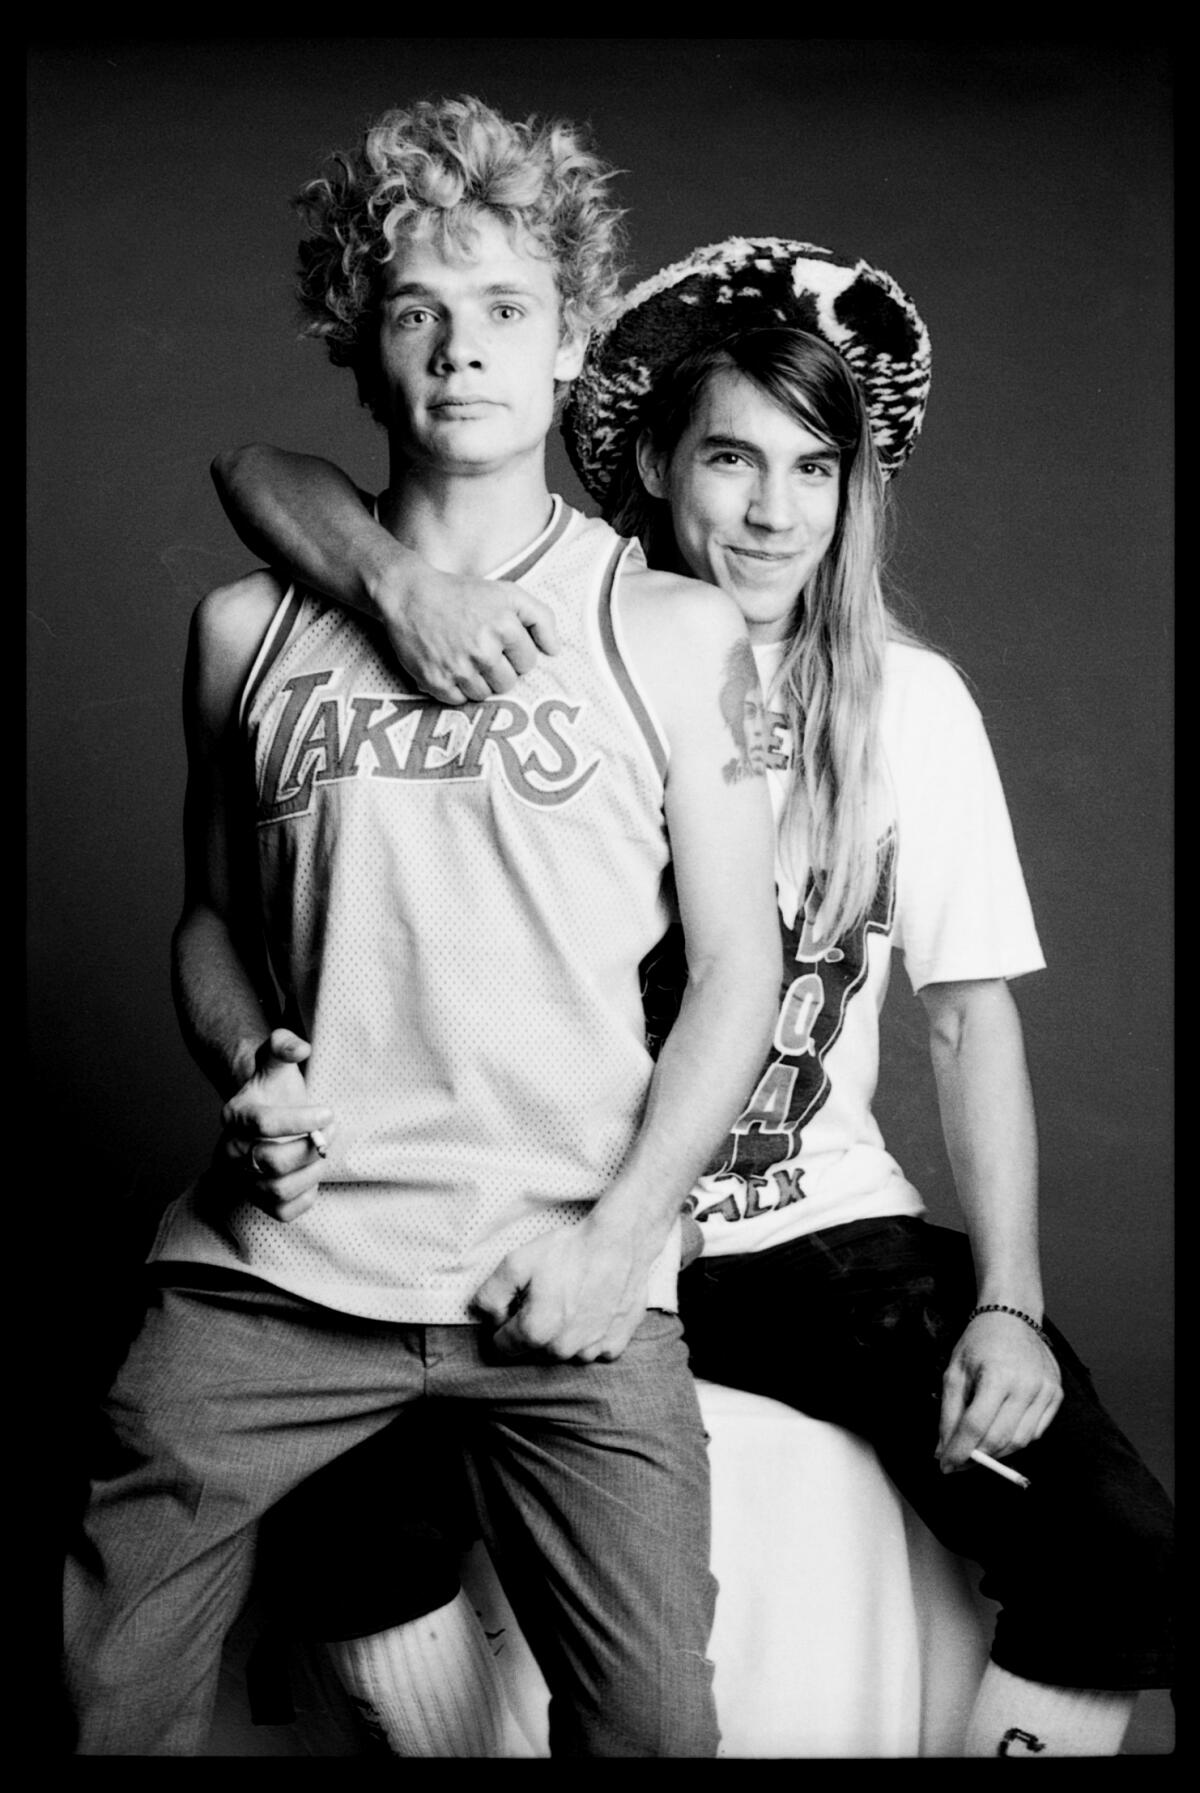 Flea and Anthony Kiedis, young and long-haired